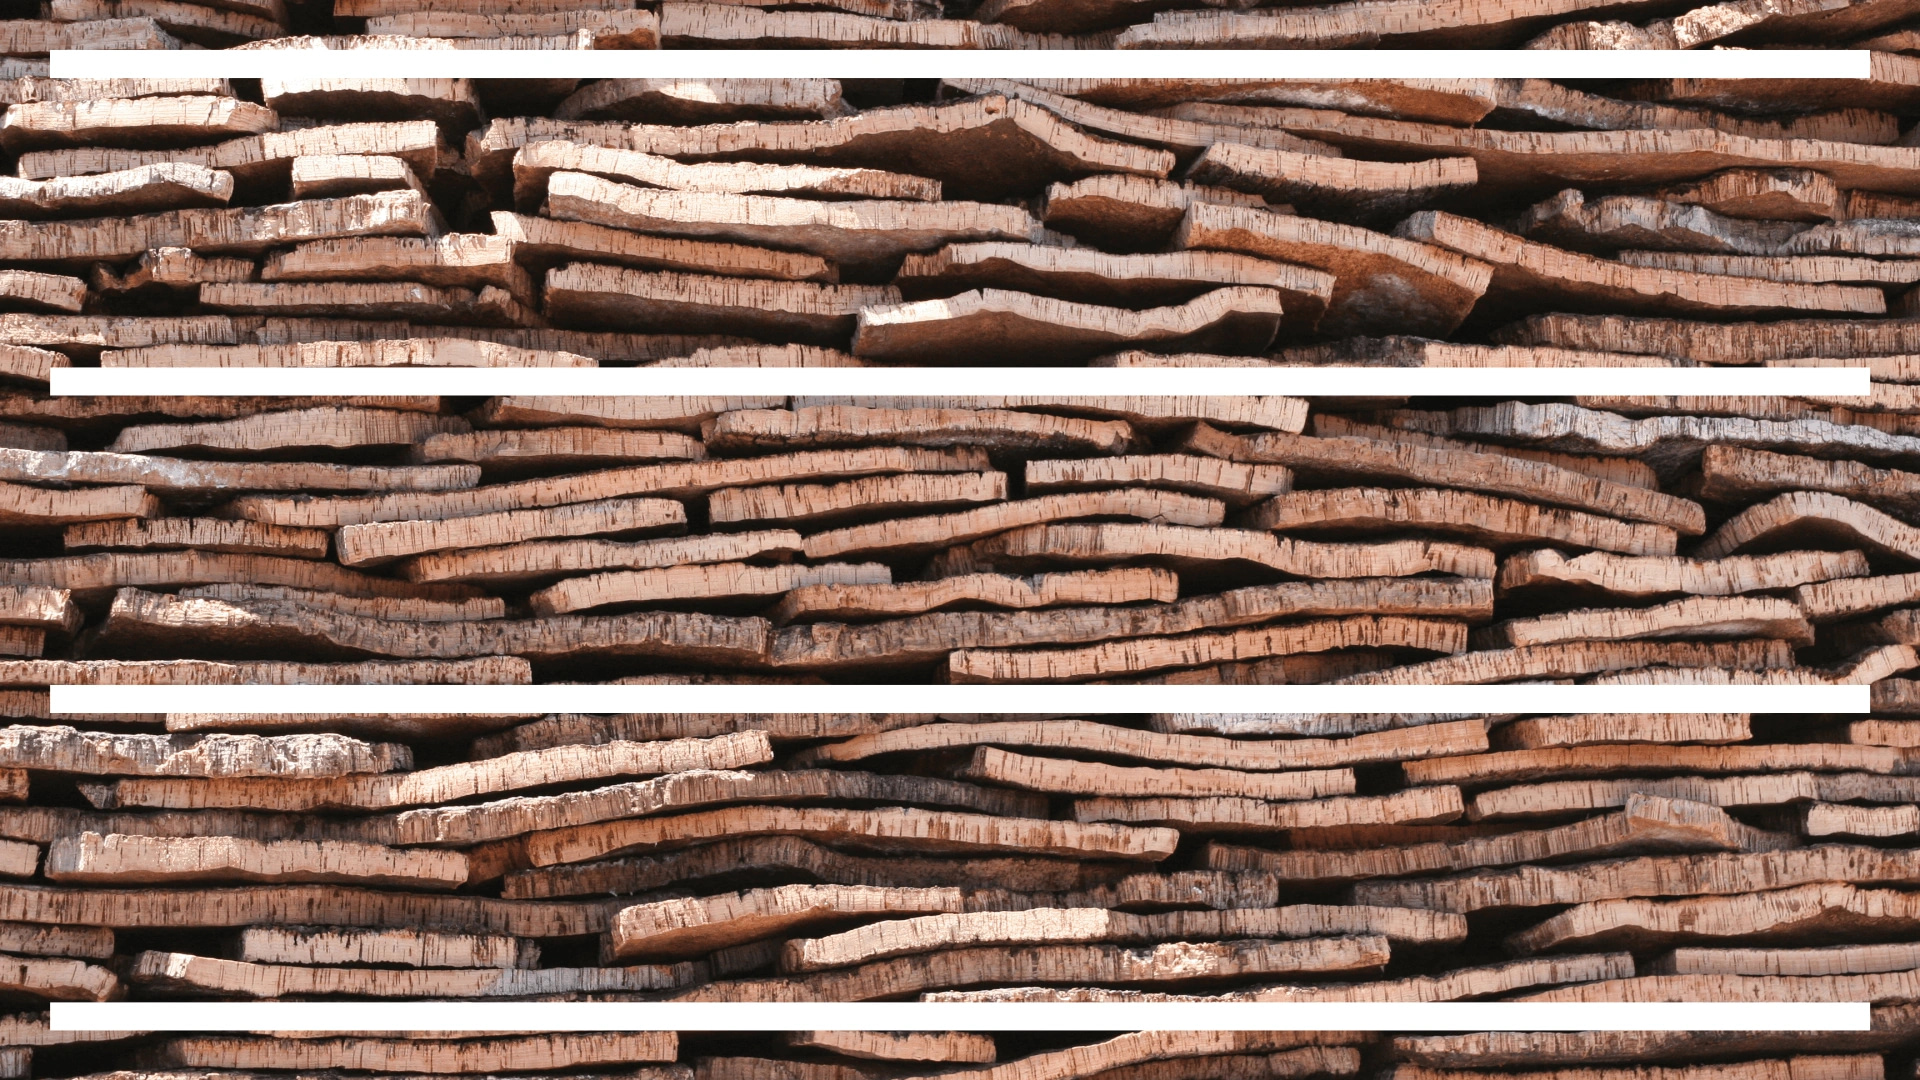 Image taken from the Amorim motion film, a photograph of layers of cork in a pile with 4 white lines following it.